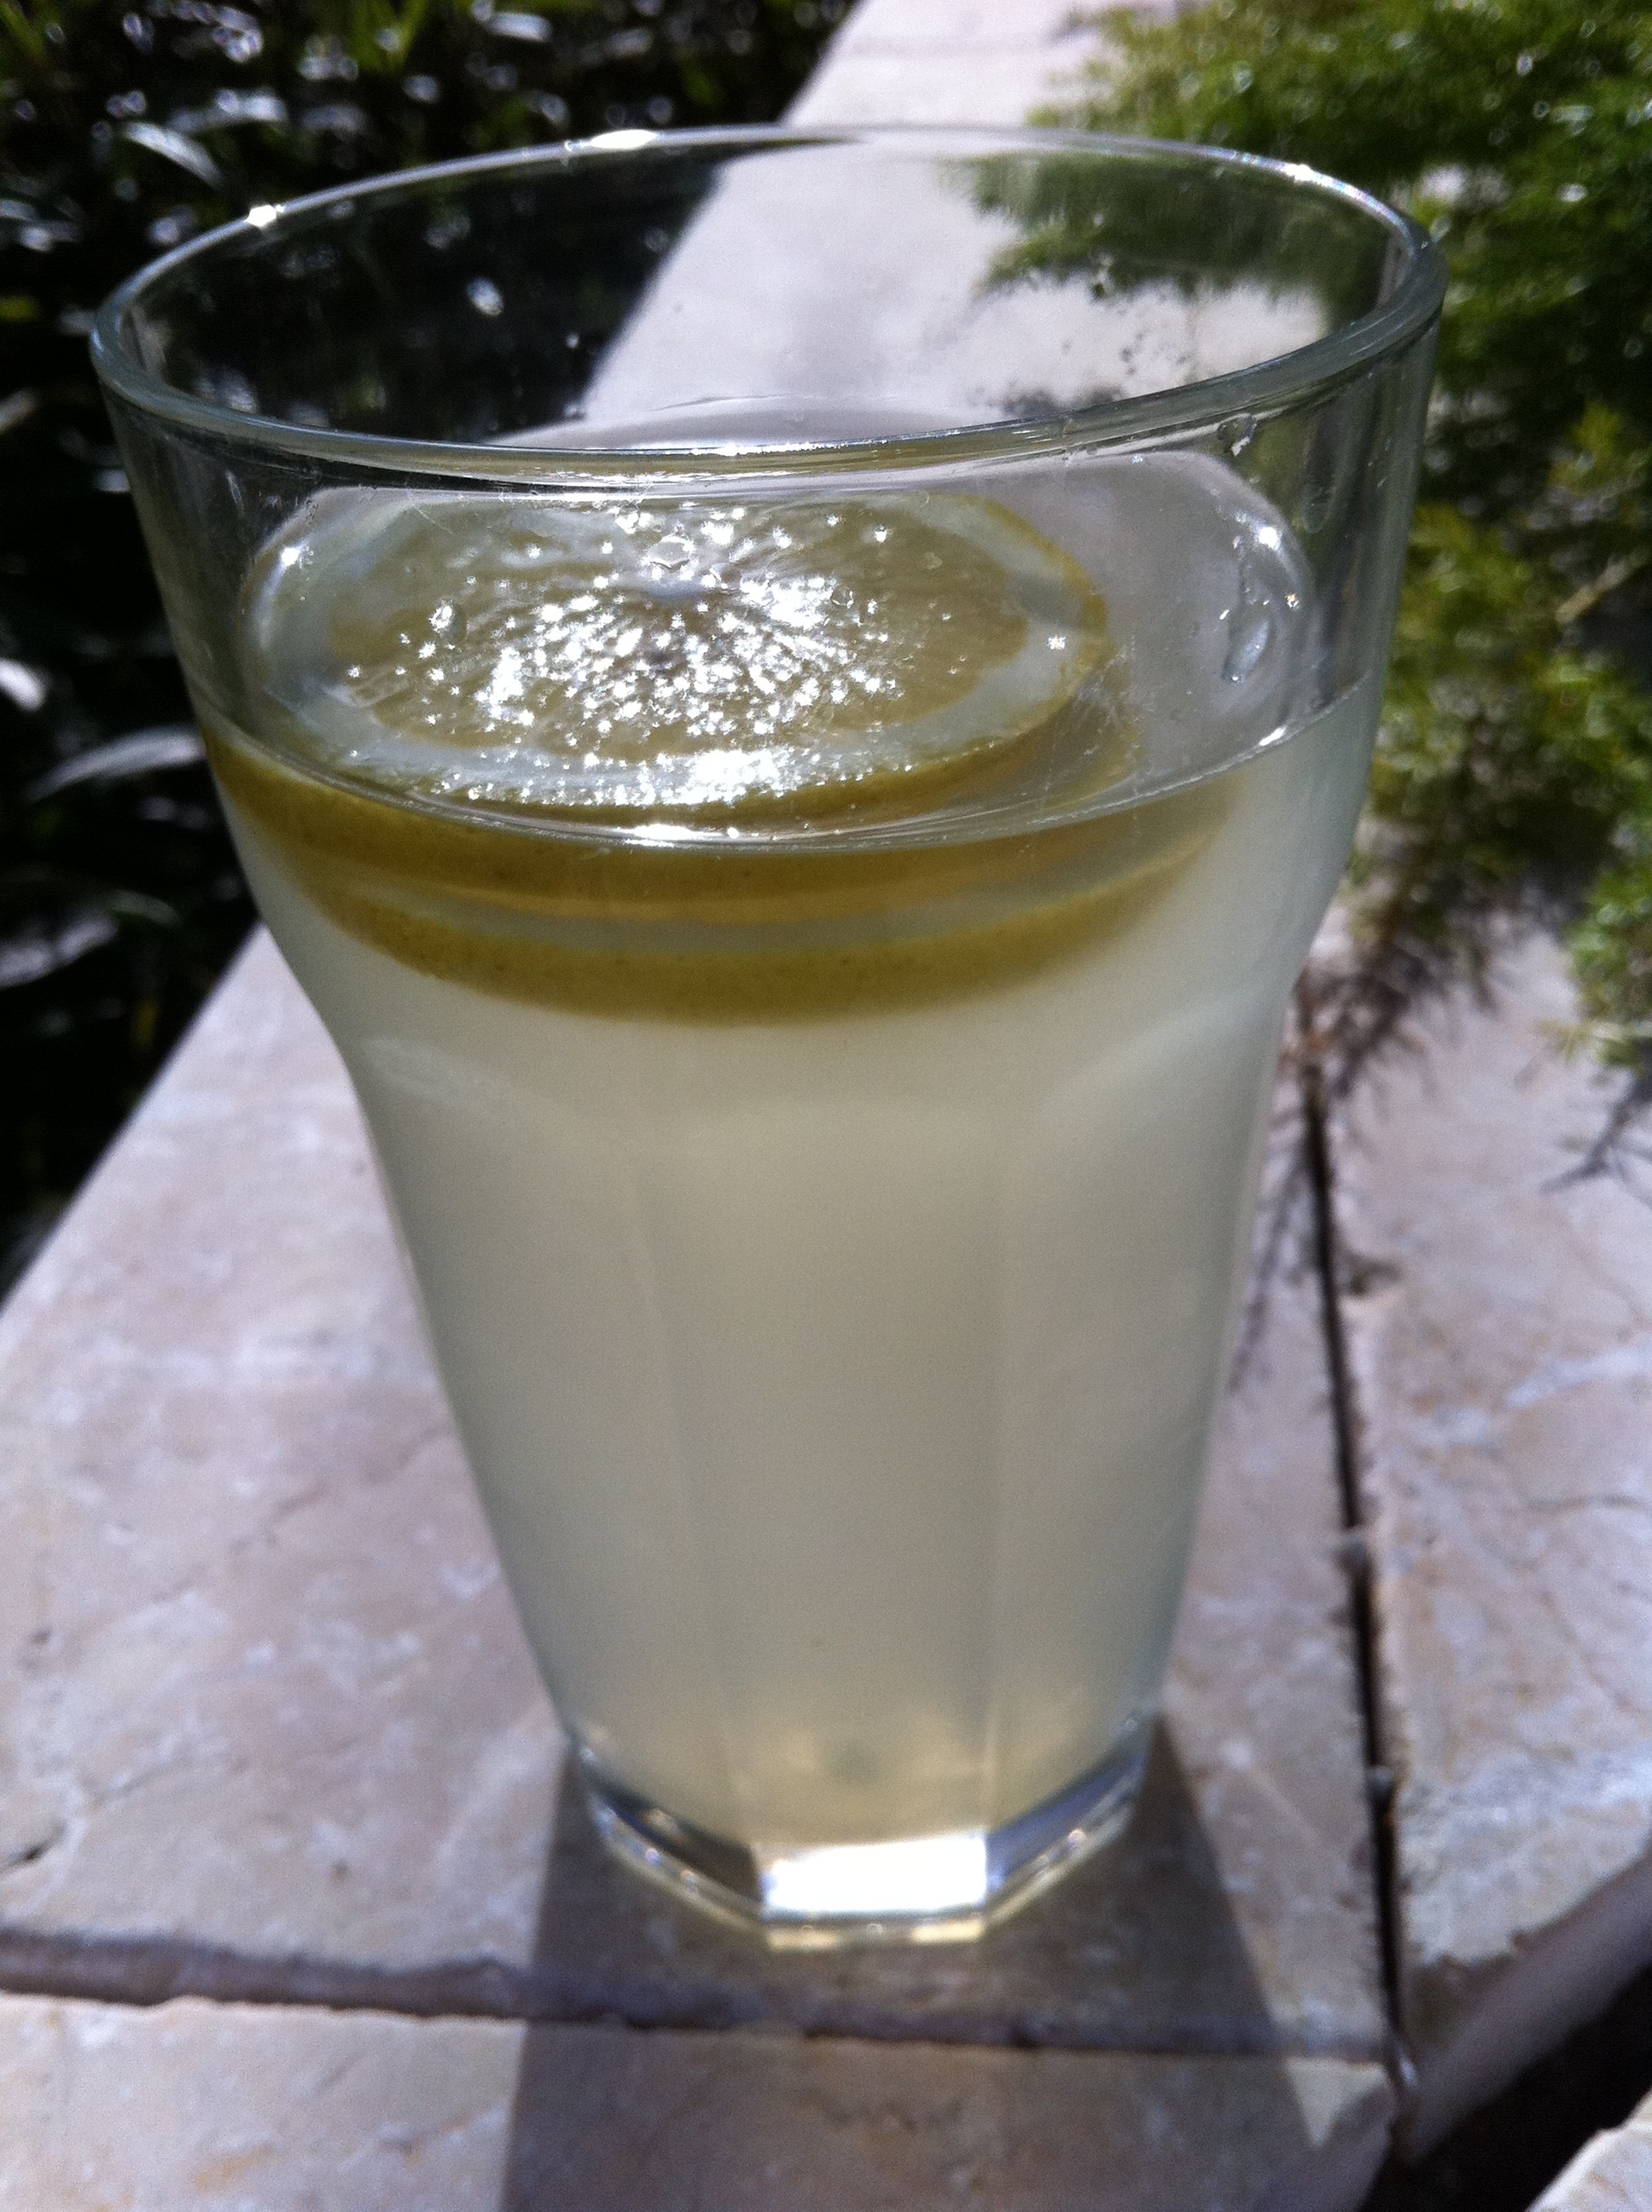 This lemon drink is superhealthy and the perfect start to a vegan day.